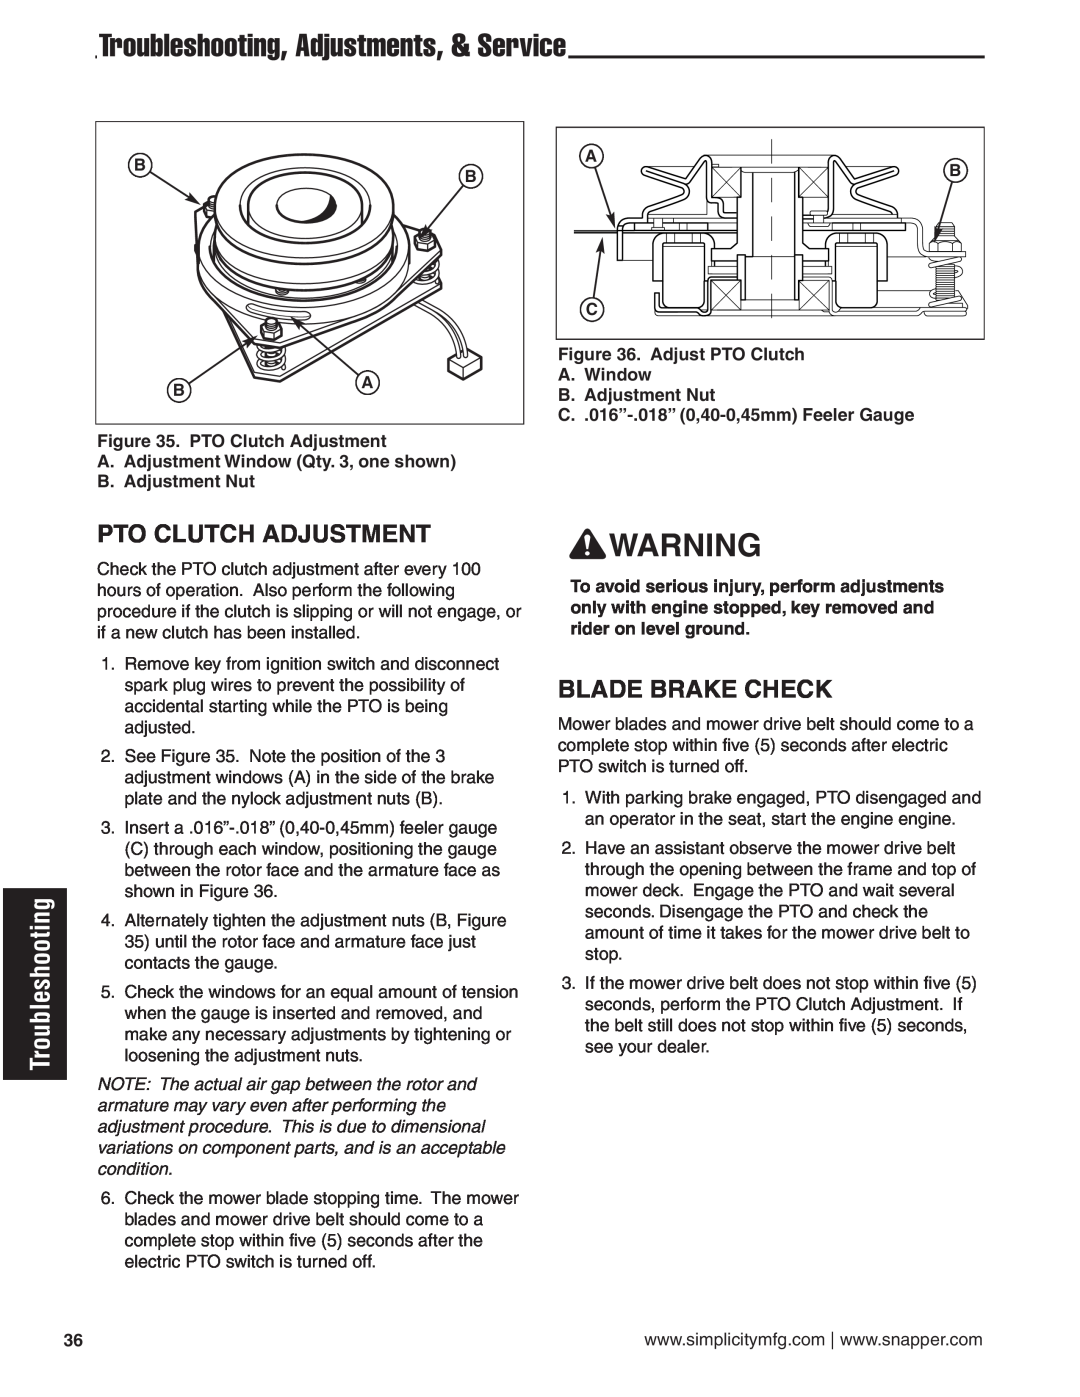 Simplicity 24HP manual Pto Clutch Adjustment, Blade Brake Check, Troubleshooting, Adjustments, & Service 